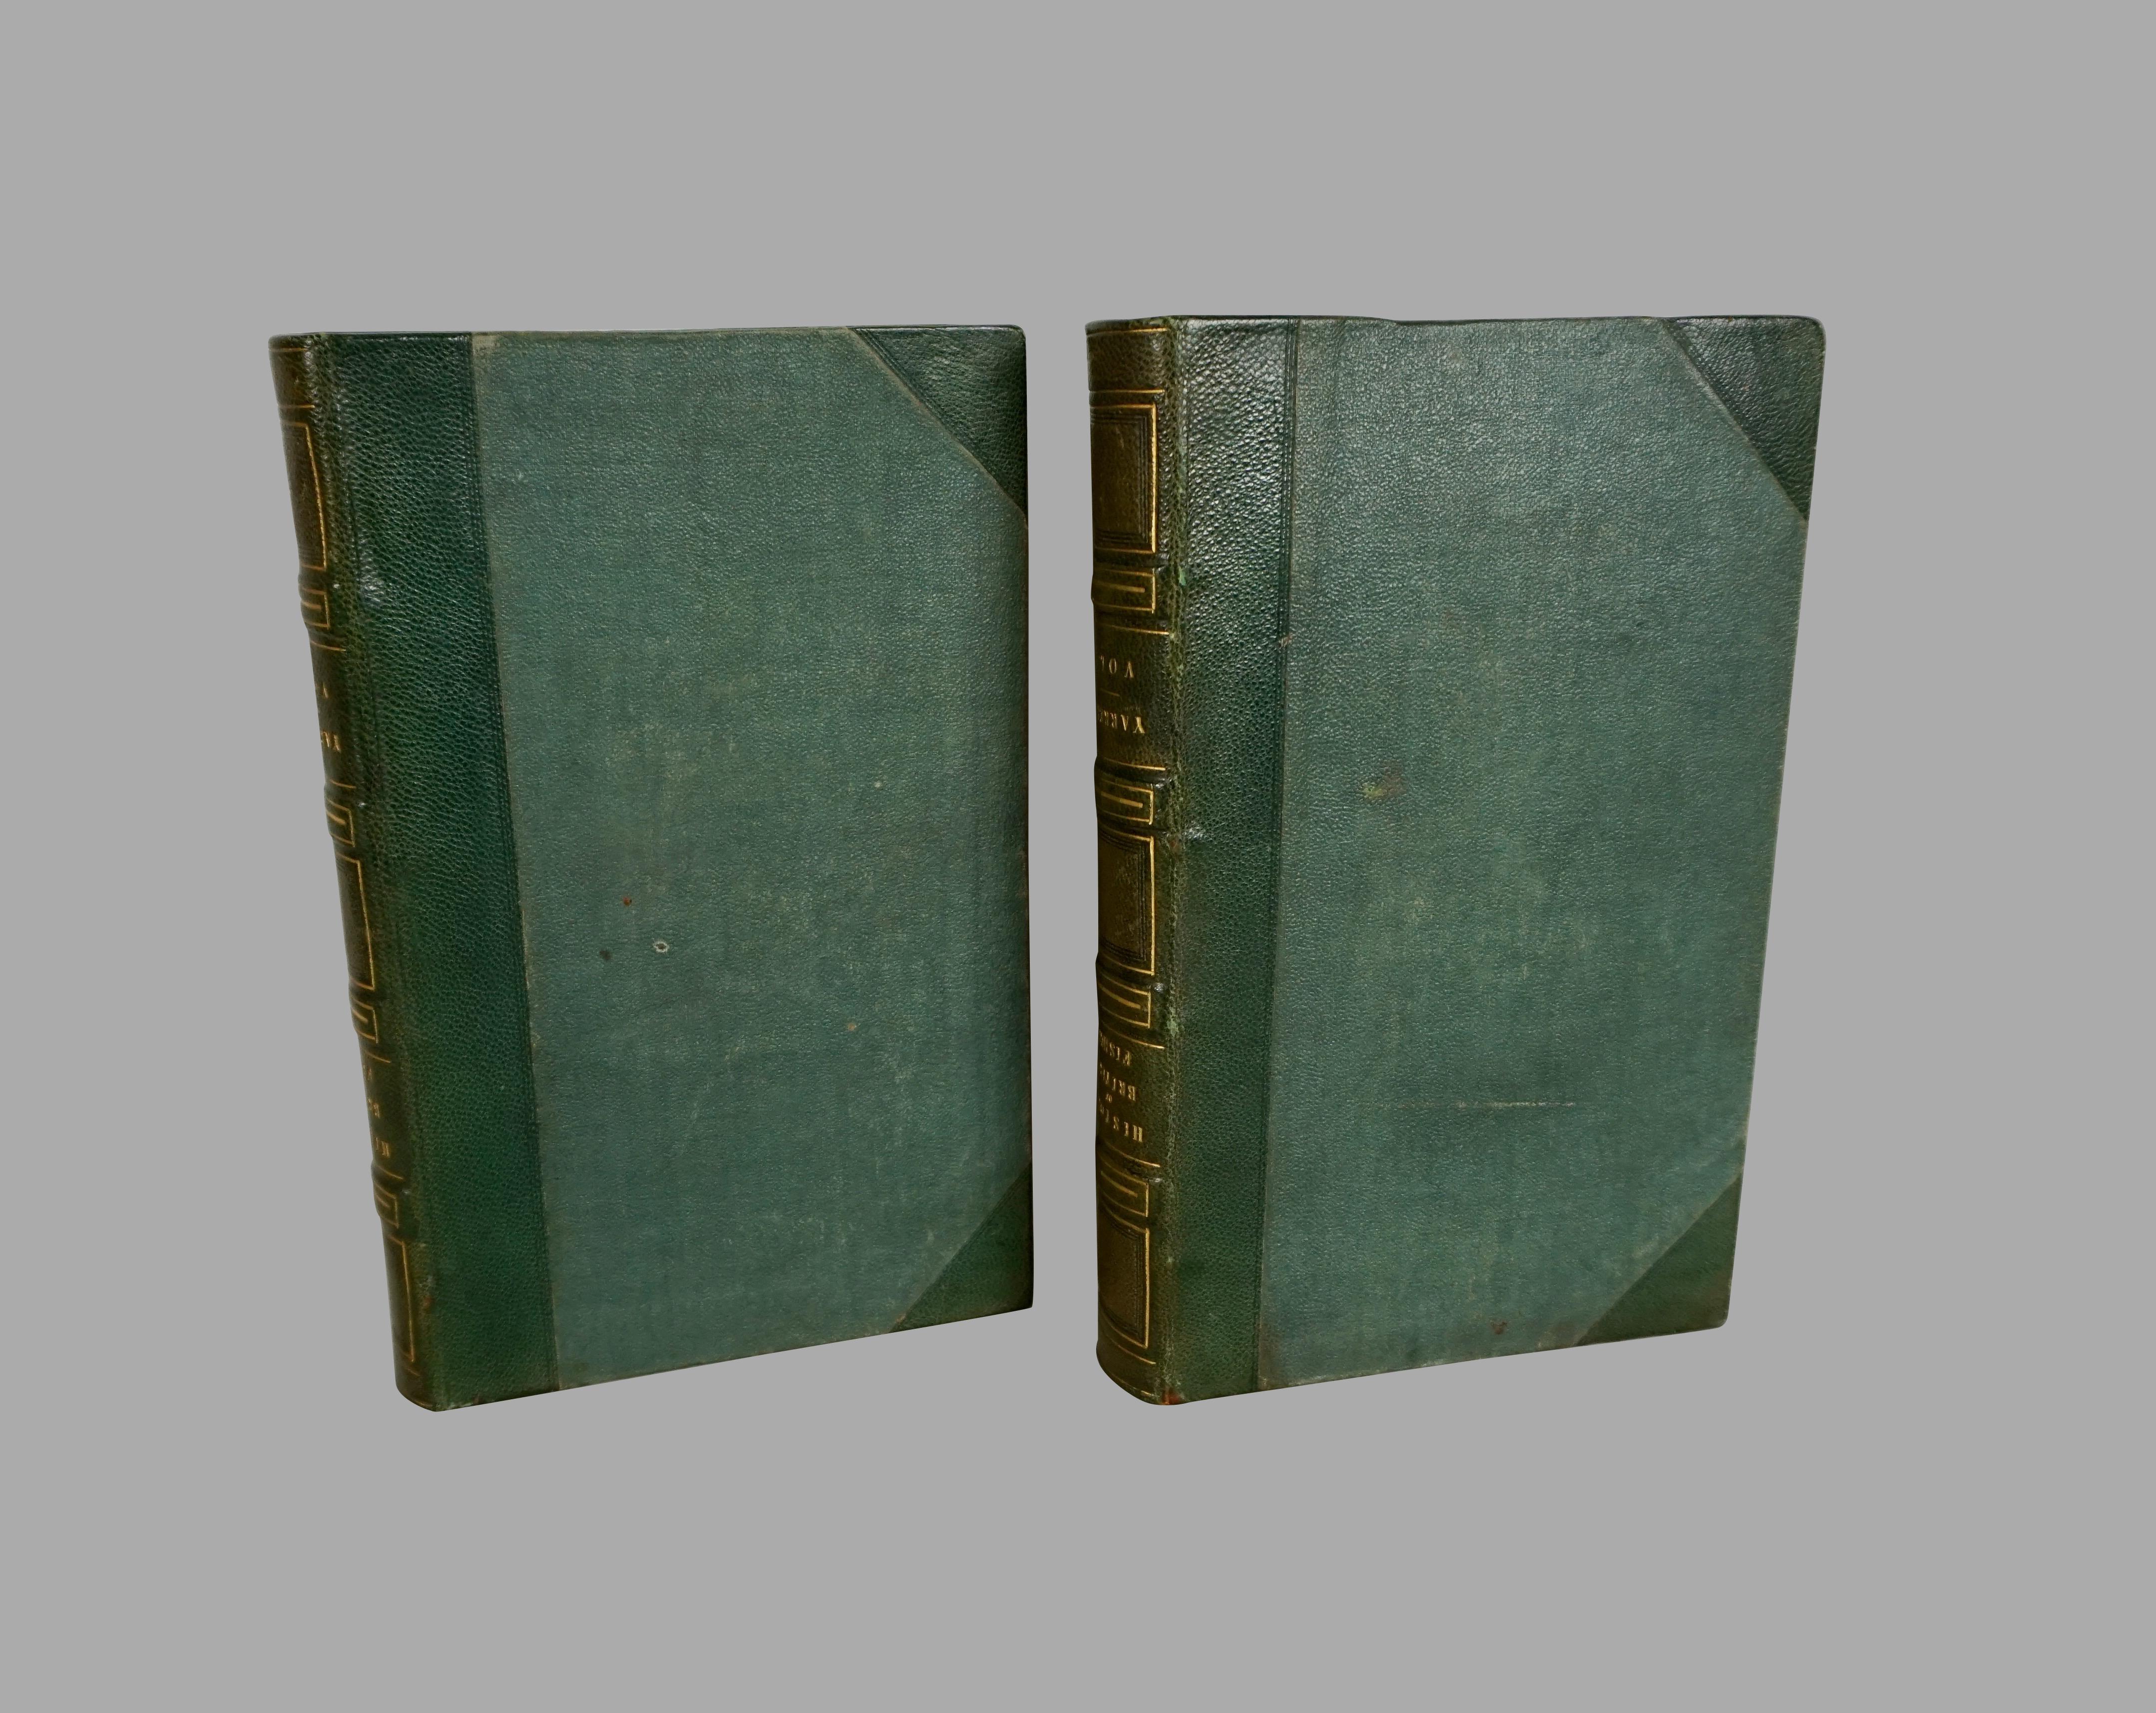 An interesting and well-illustrated leather bound copy of the History of British fish in 2 volumes, written by William Yarrell, famed British zoologist and naturalist, member of the Royal Institute and friend of John James Audubon. This work, with